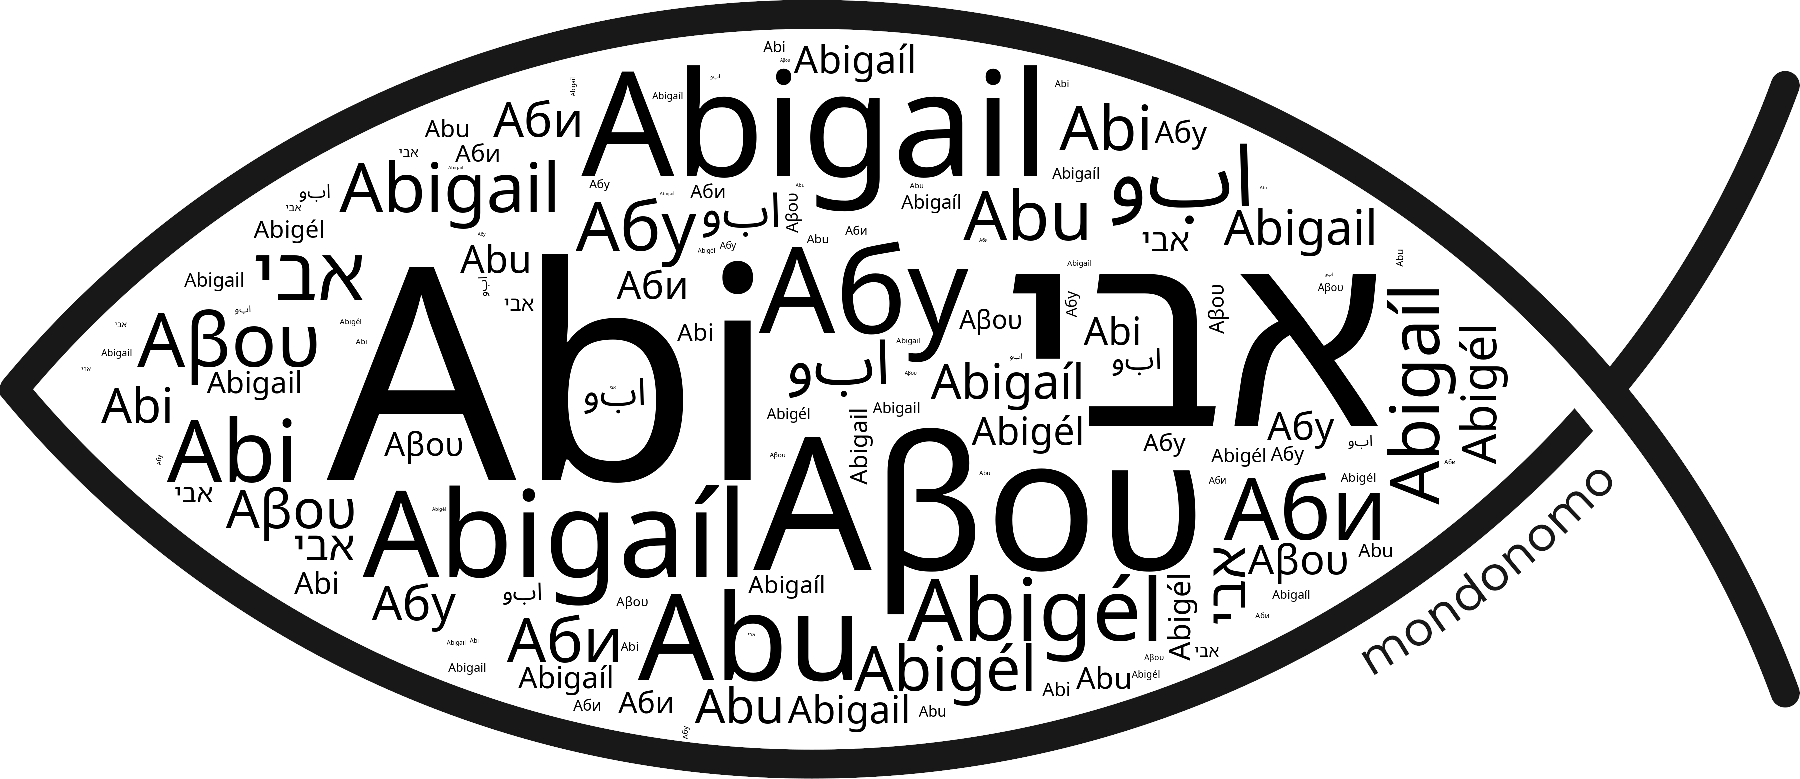 Name Abi in the world's Bibles